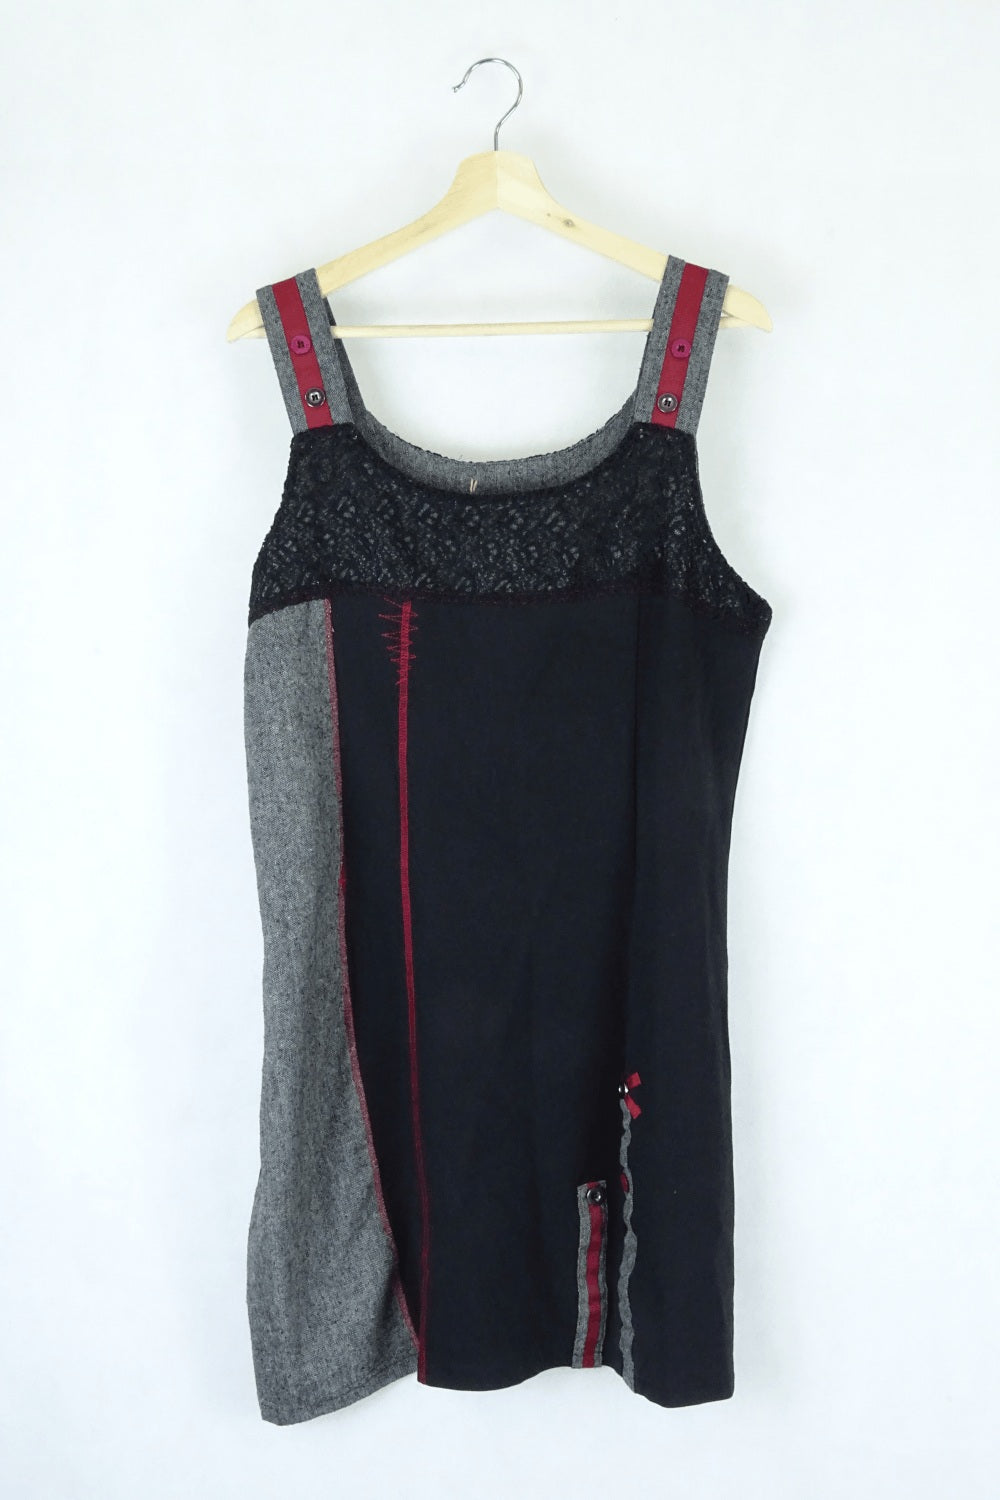 Hot Ice Collection Black, Red And Grey Dress